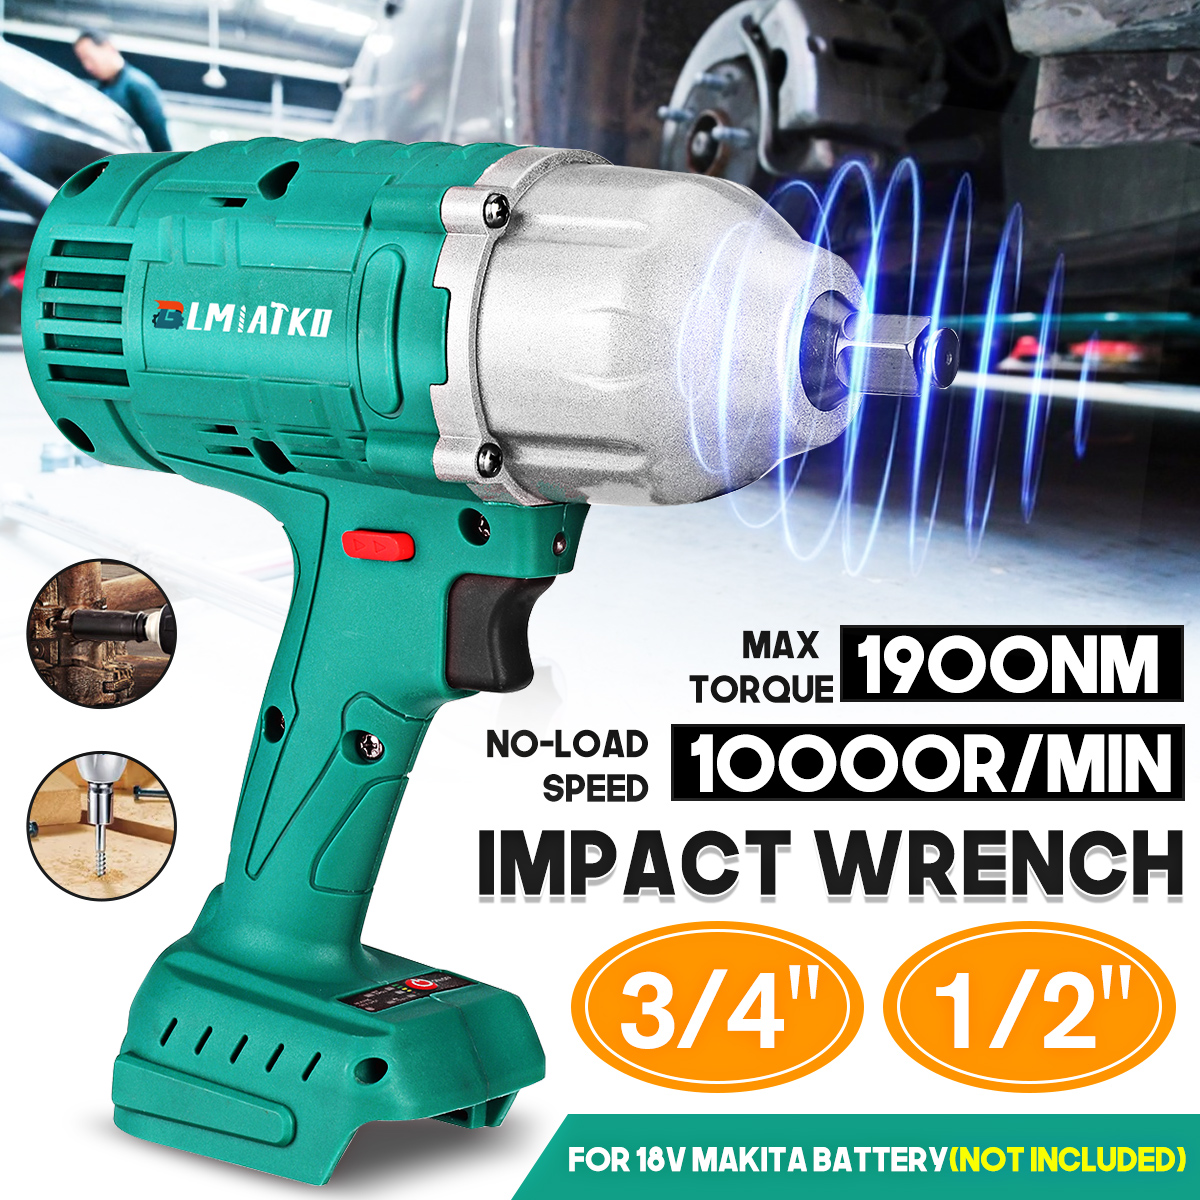 BLMIATKO-18V-1900Nm-Electric-Brushless-Impact-Wrench-Rechargeable-Woodworking-Maintenance-Tool-1943538-1